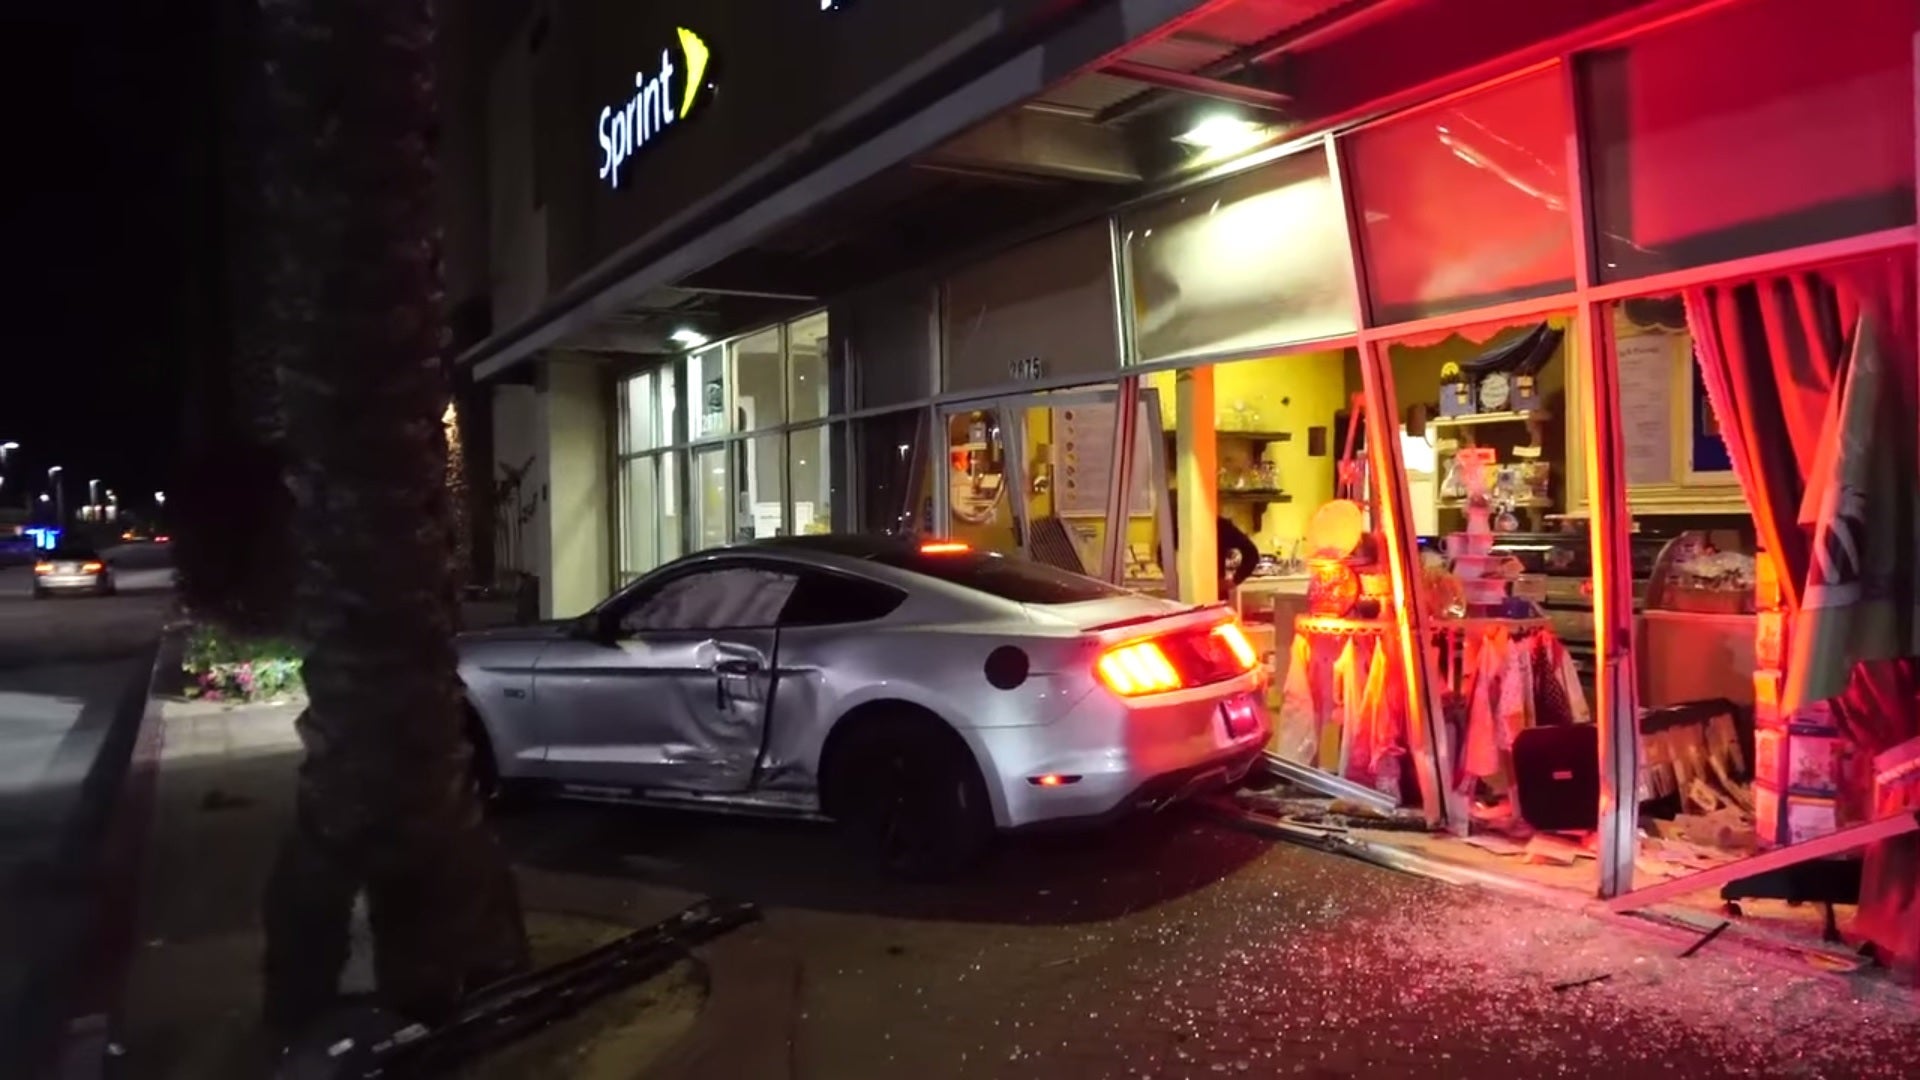 Mustang Owner Crashes Into Cake Shop, Gives Fake Phone Number, Leaves